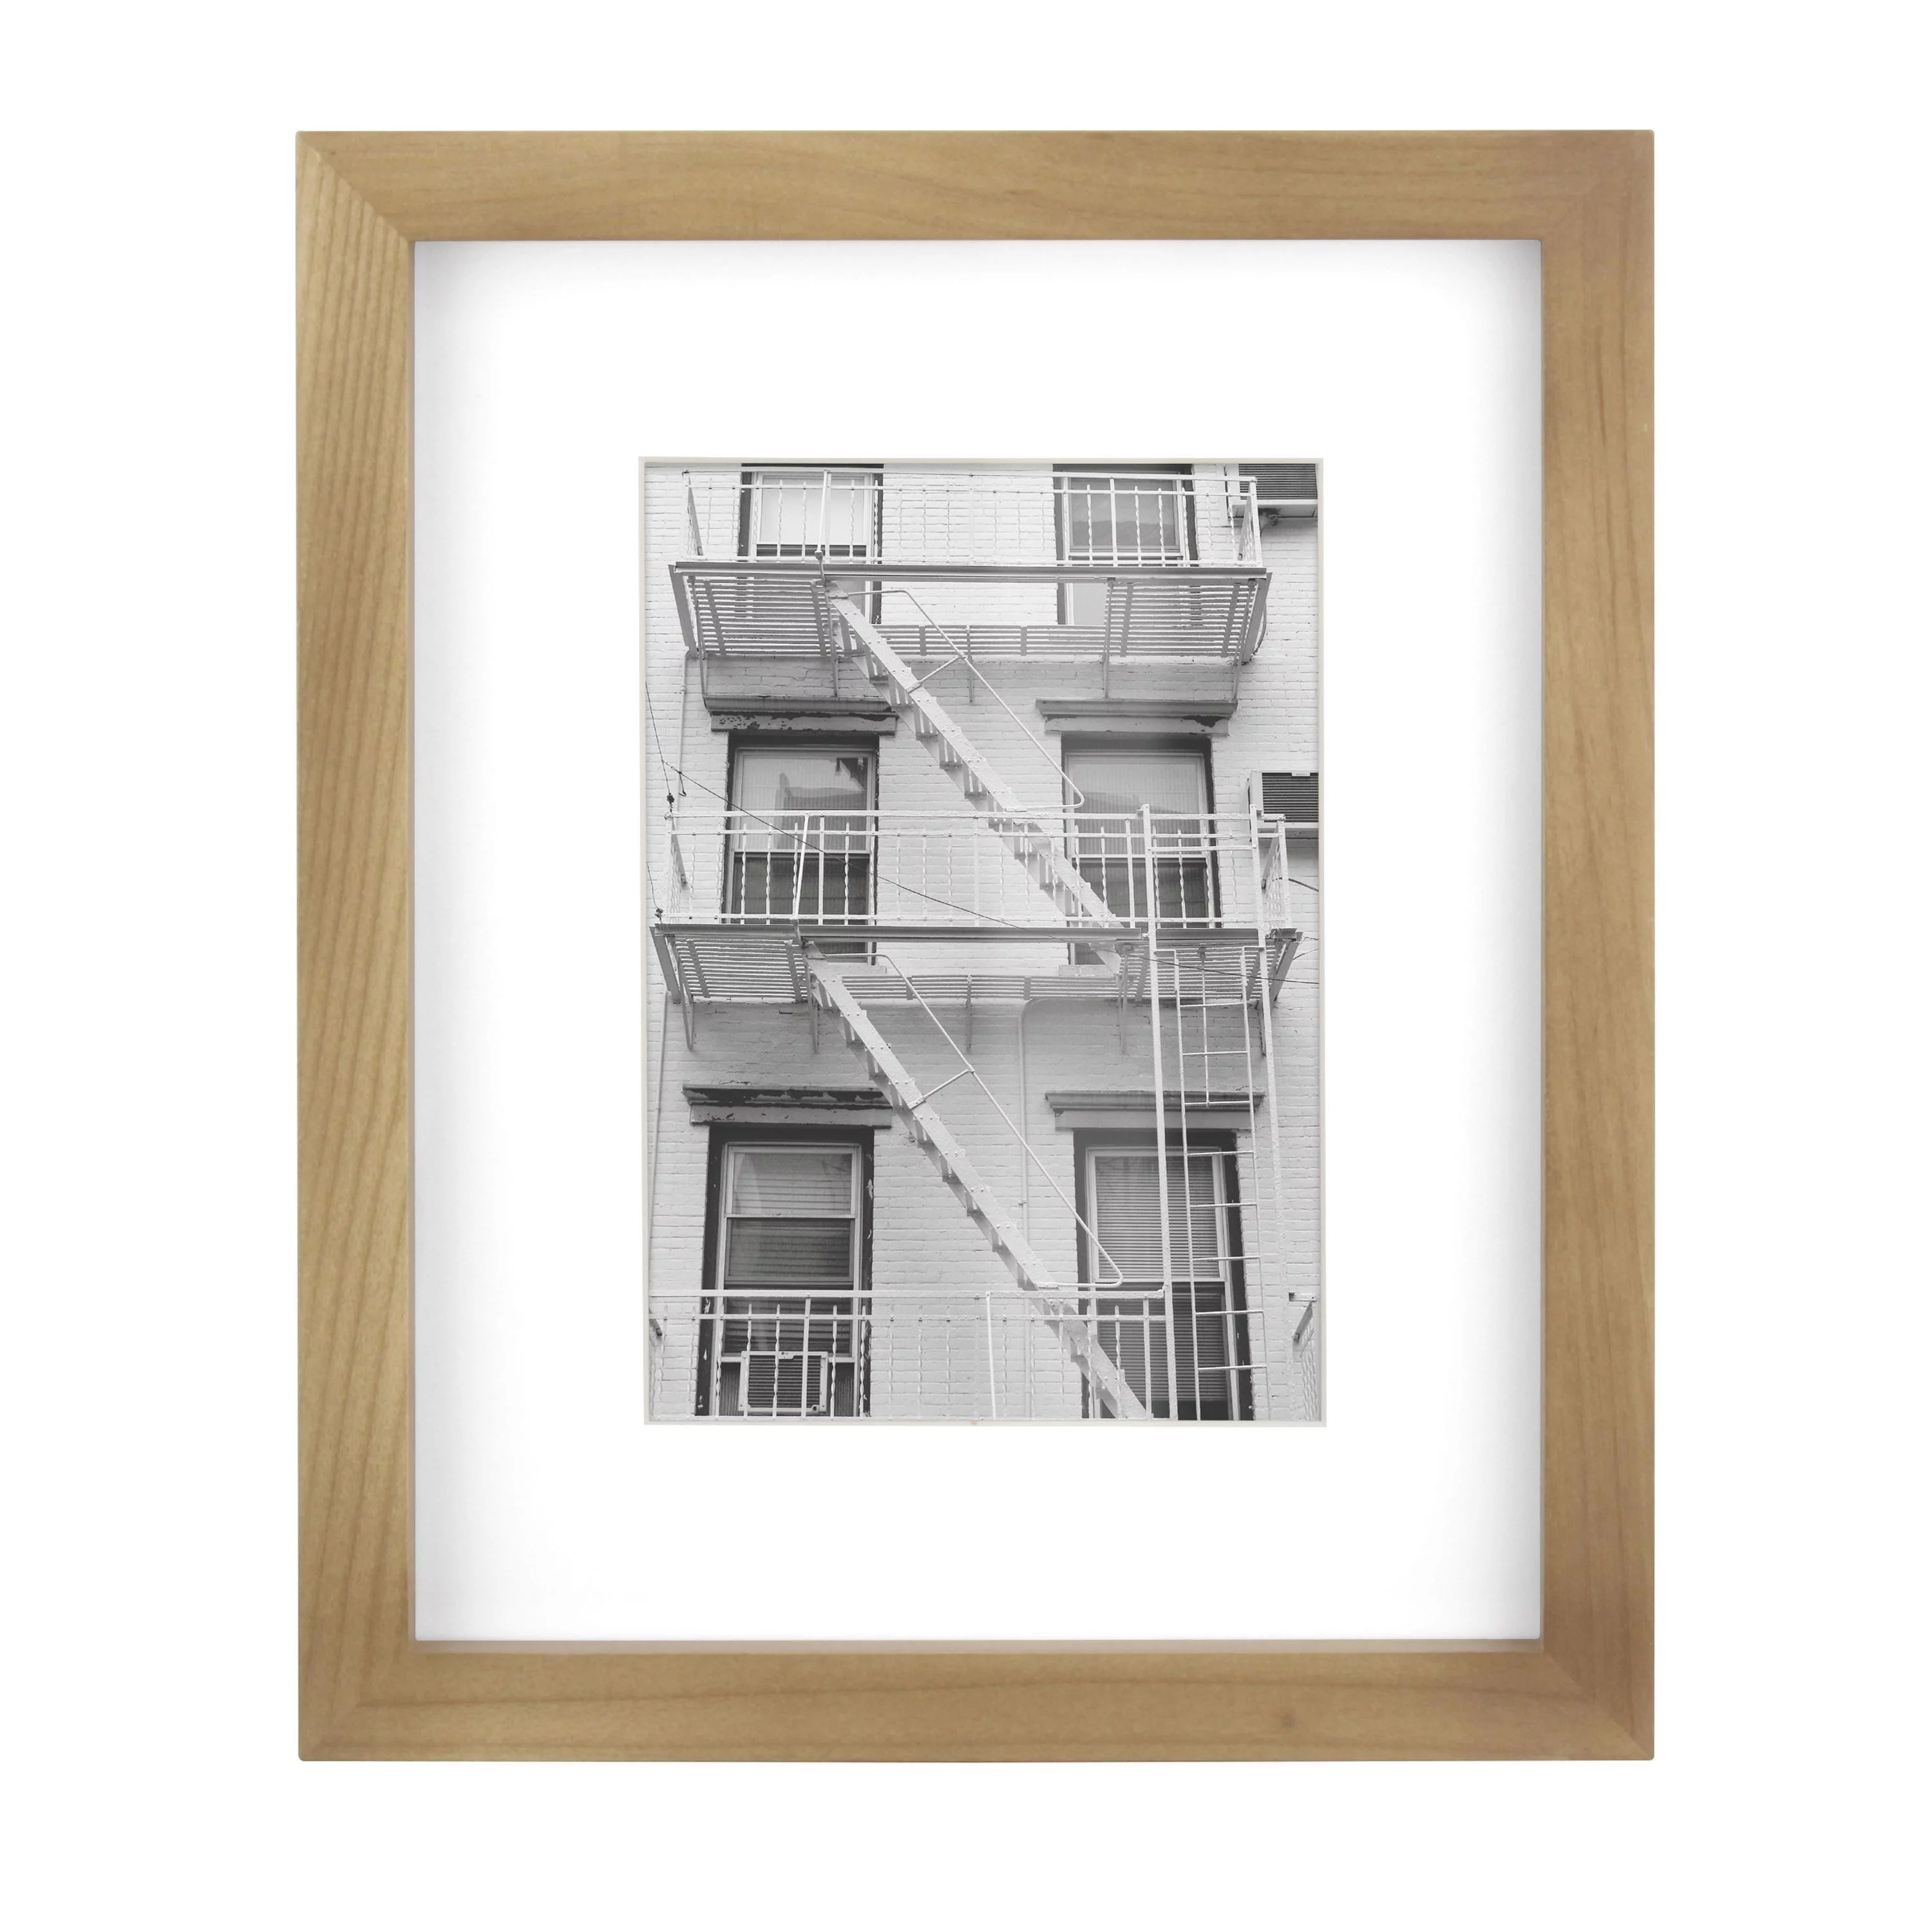 Better Homes & Gardens 8x10 Matted to 5x7 Wood Wall Picture Frame | Walmart (US)